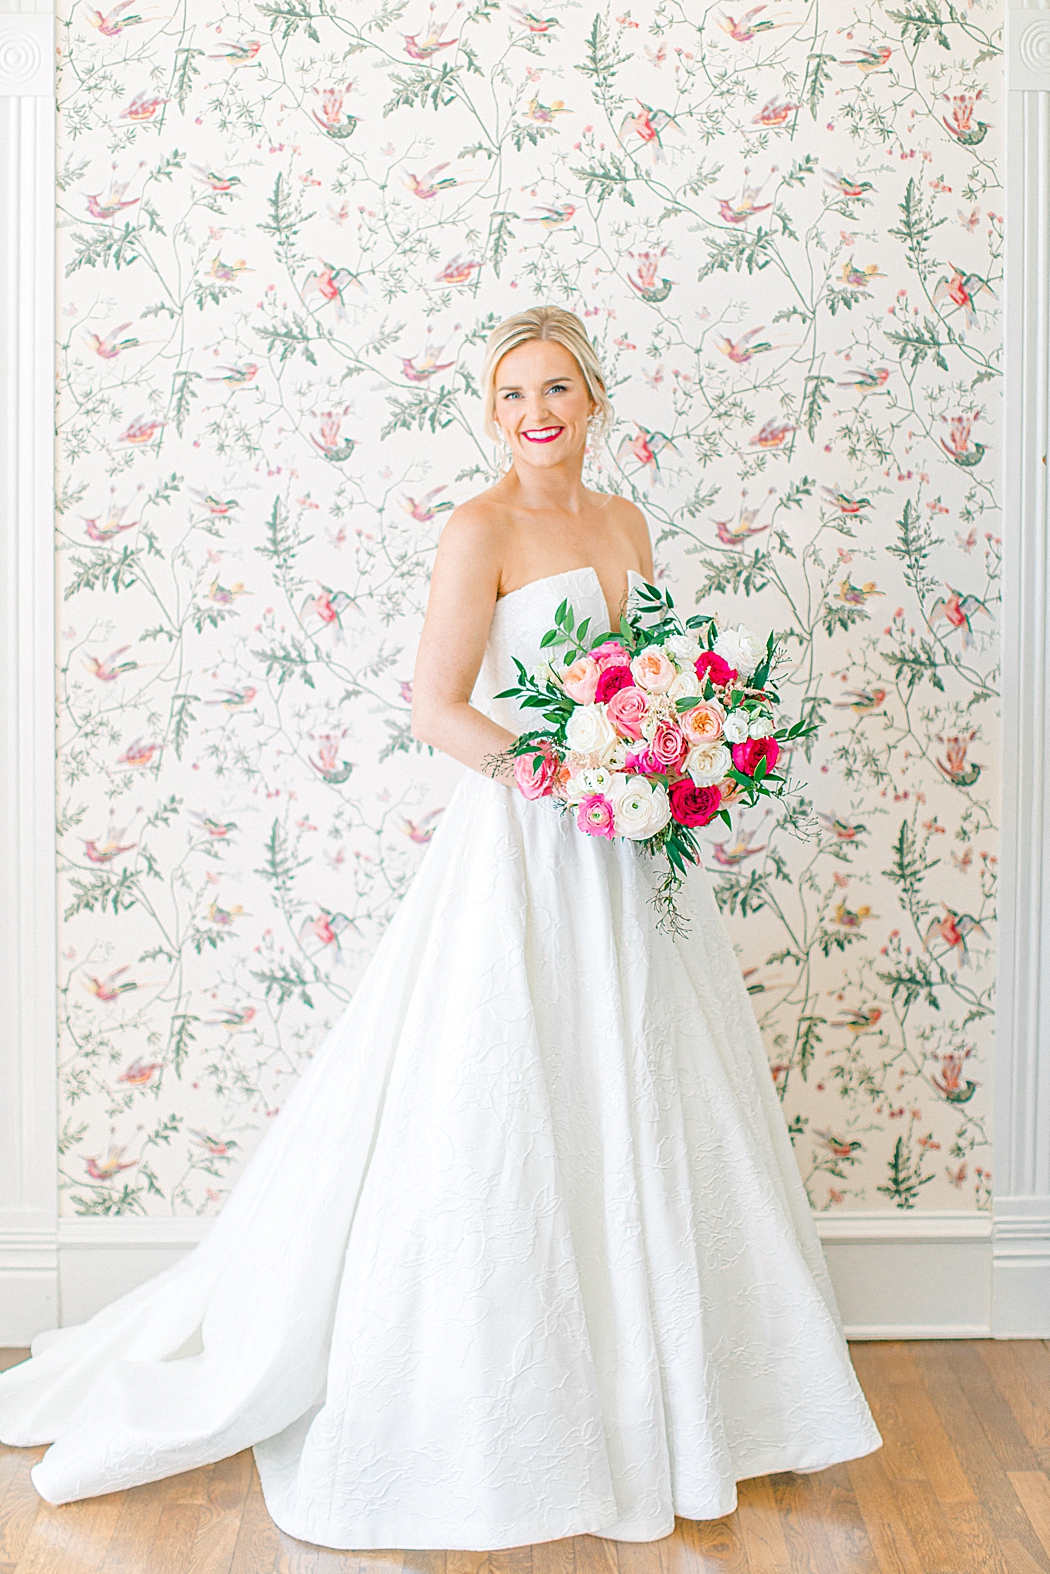 Woodbine Mansion wedding bridal photos by Allison Jeffers Photography in Round Rock Texas 0015